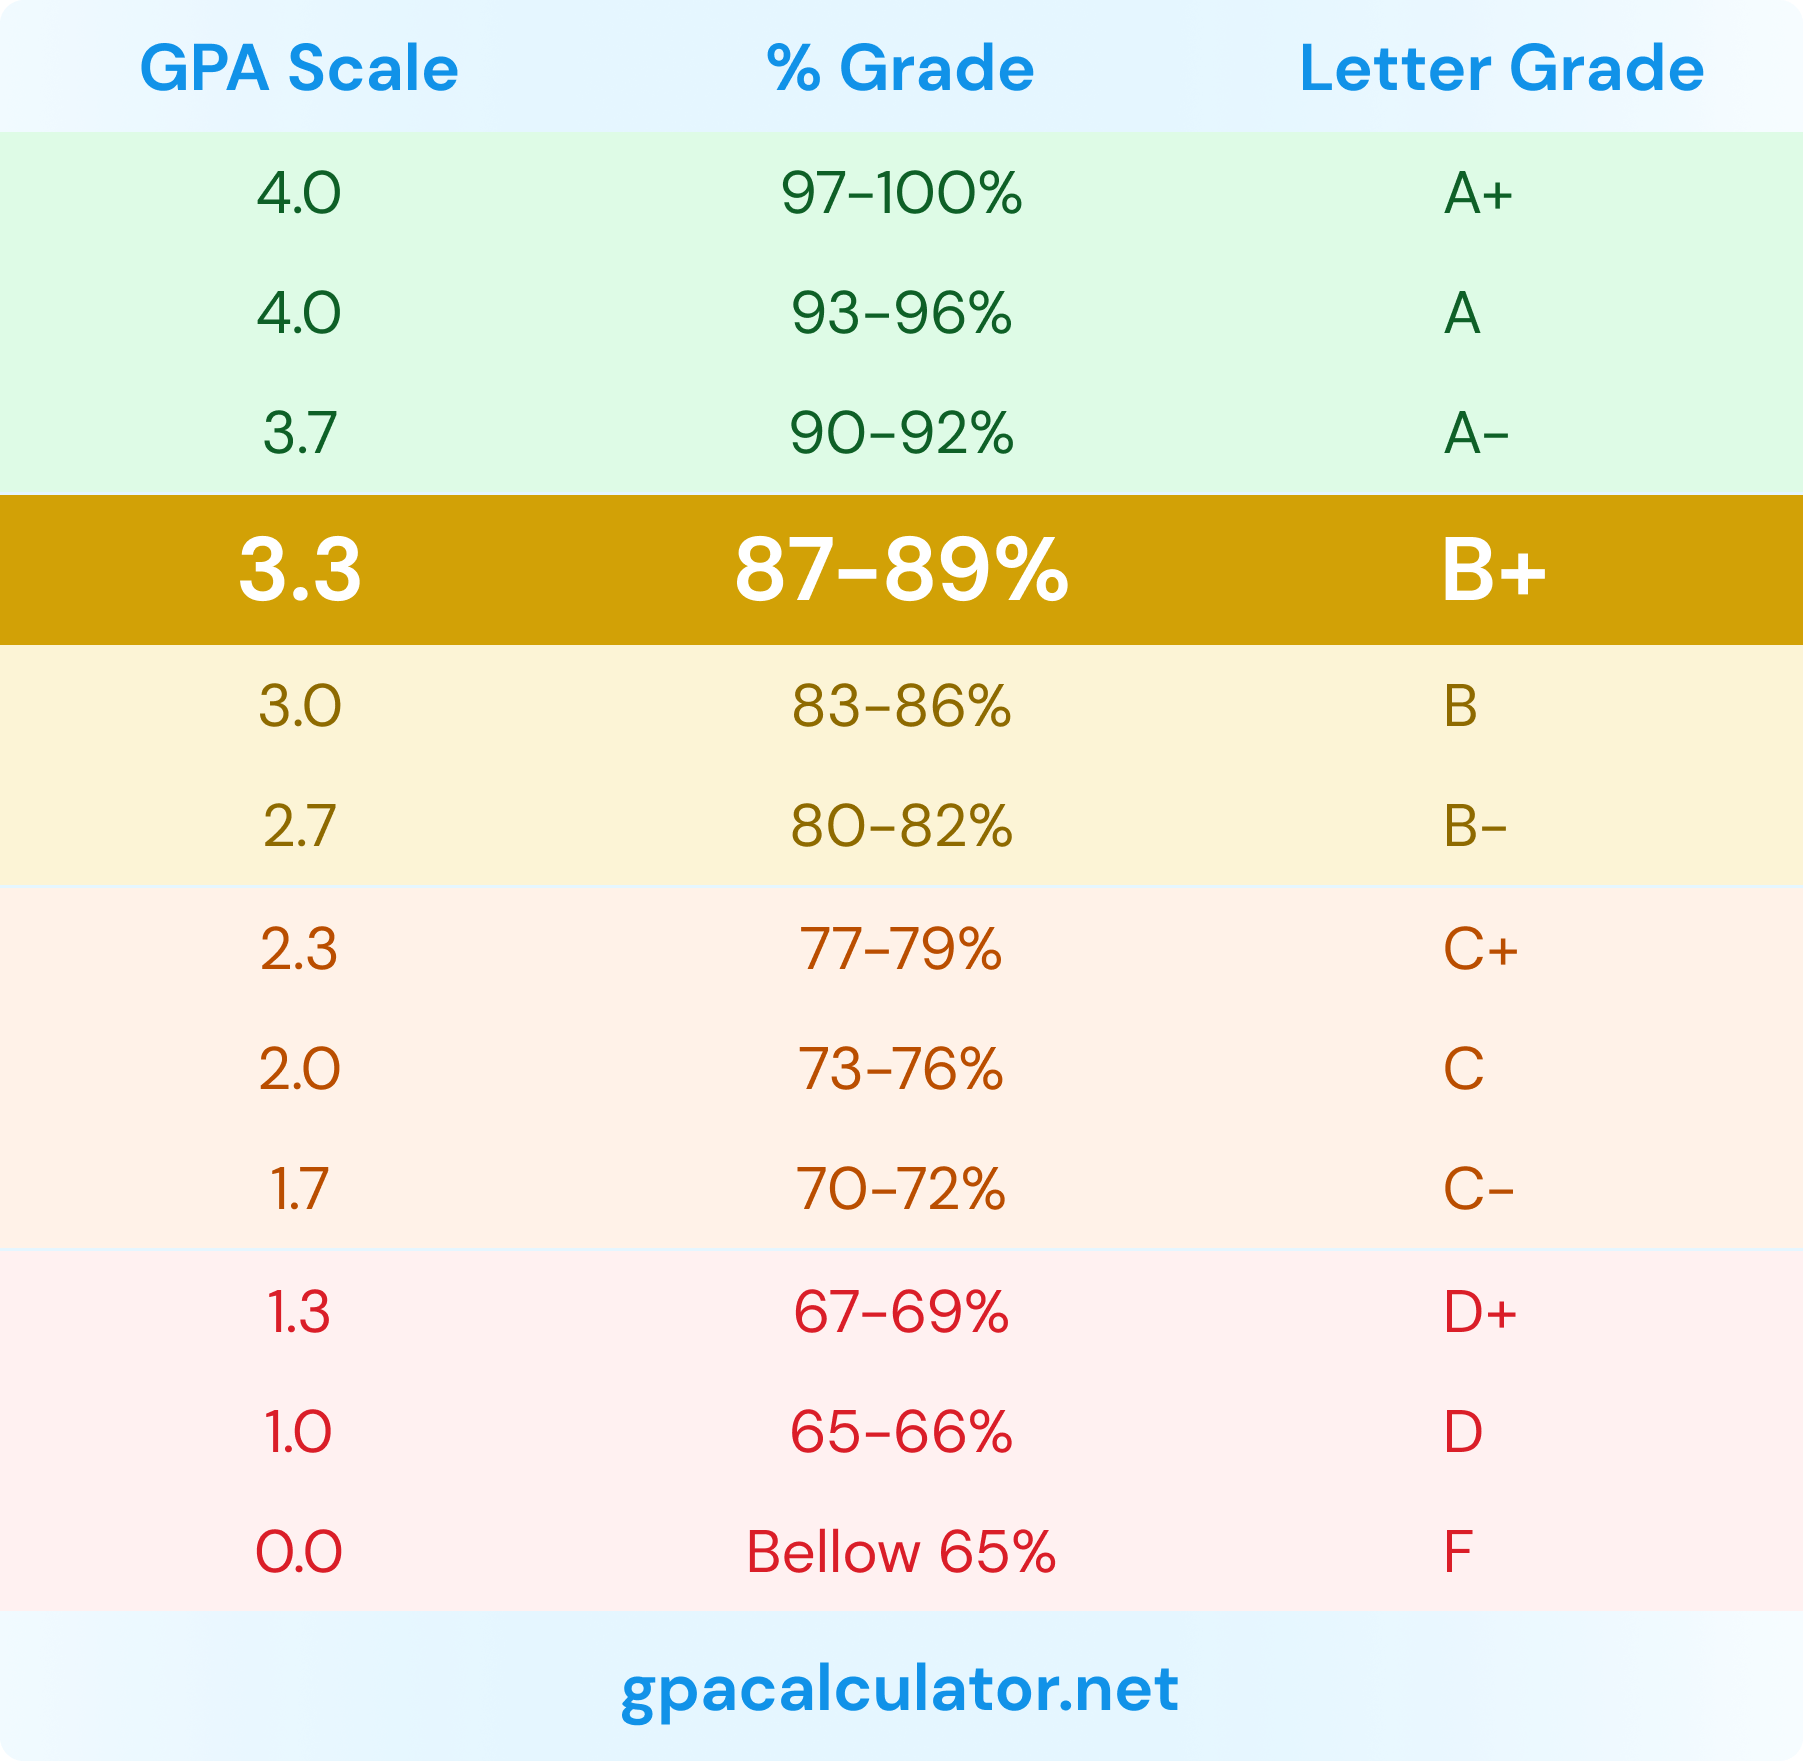 What GPA is a 97%?